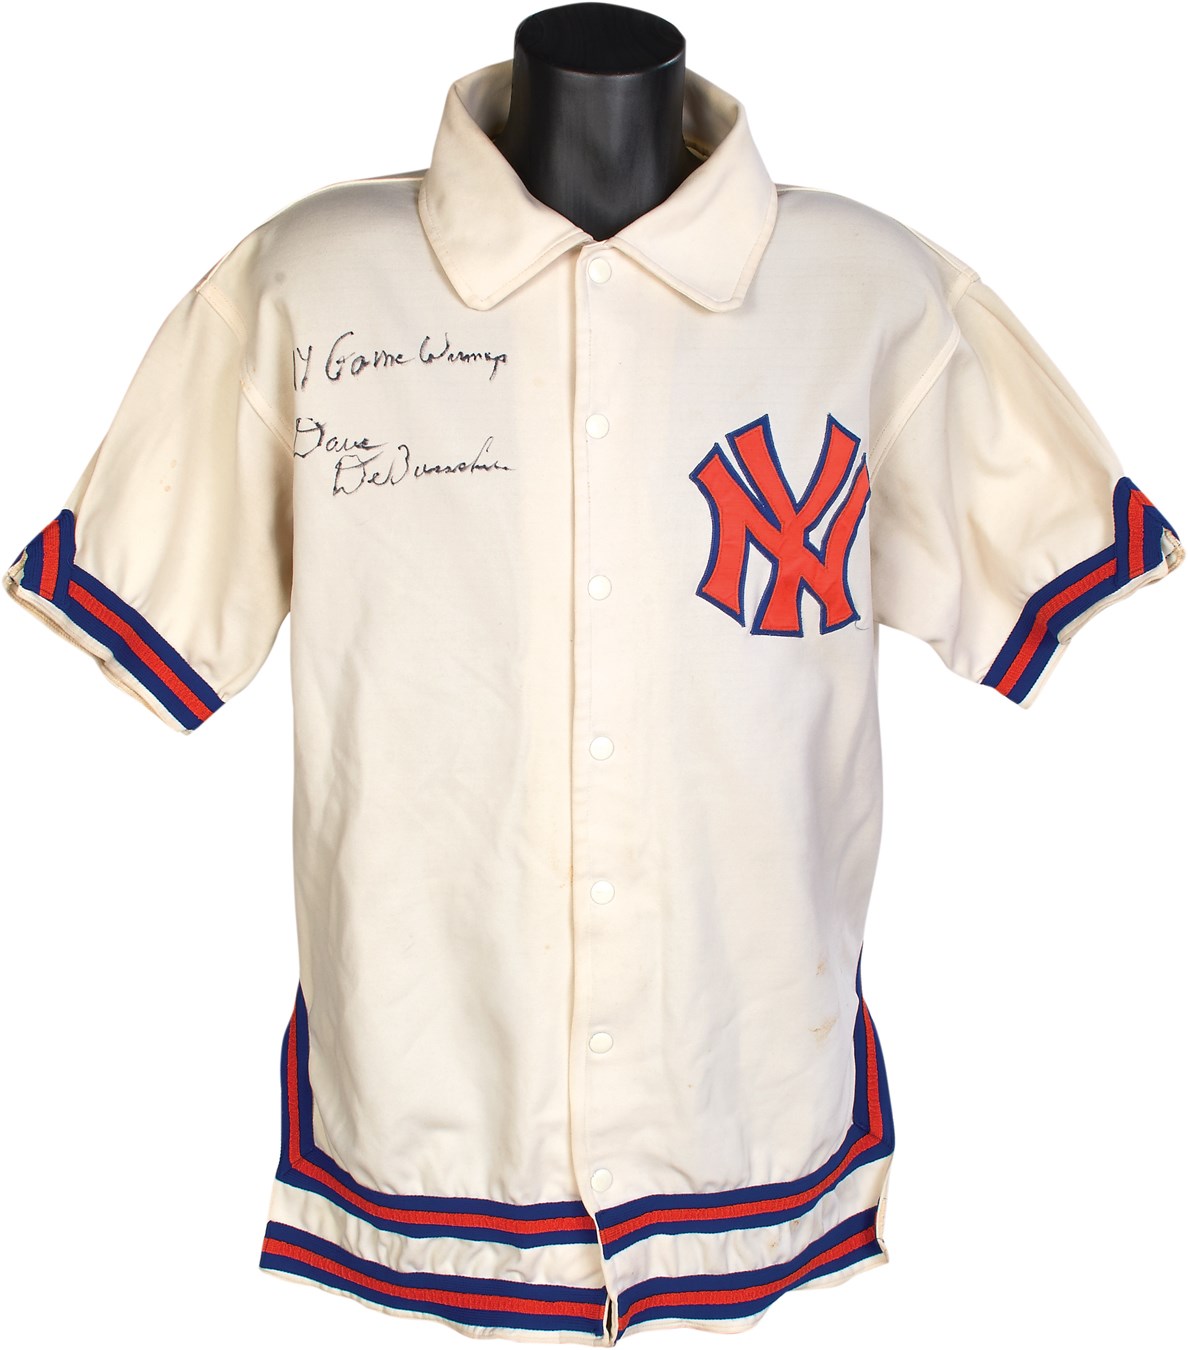 - Early 1970s Dave DeBusschere New York Knicks Warm Up Top - Photomatched to Last Regular Season Game